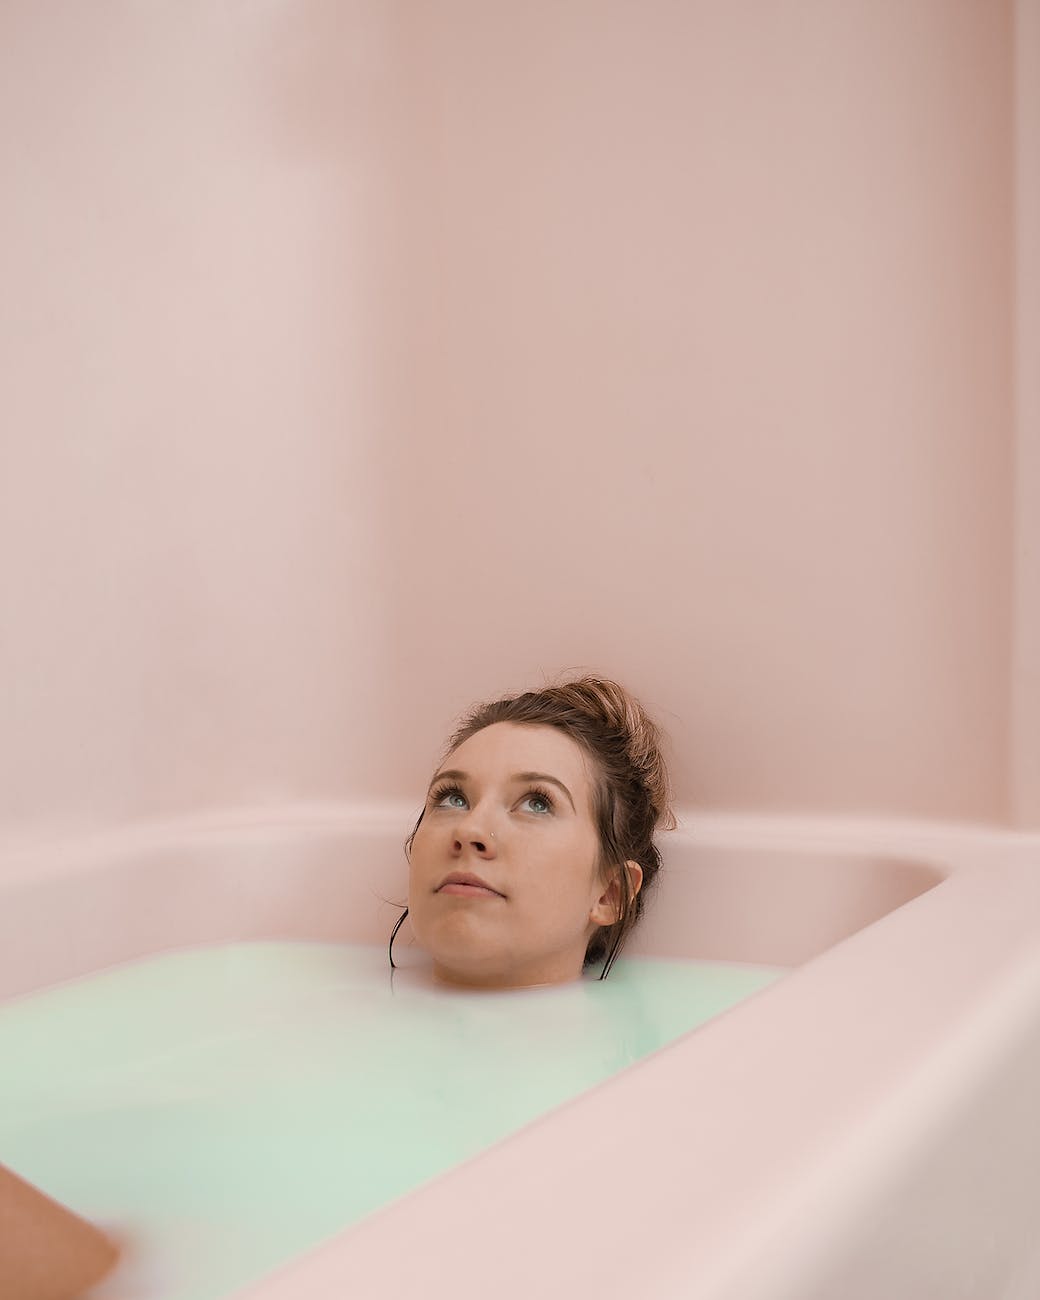 woman in bathtub with water